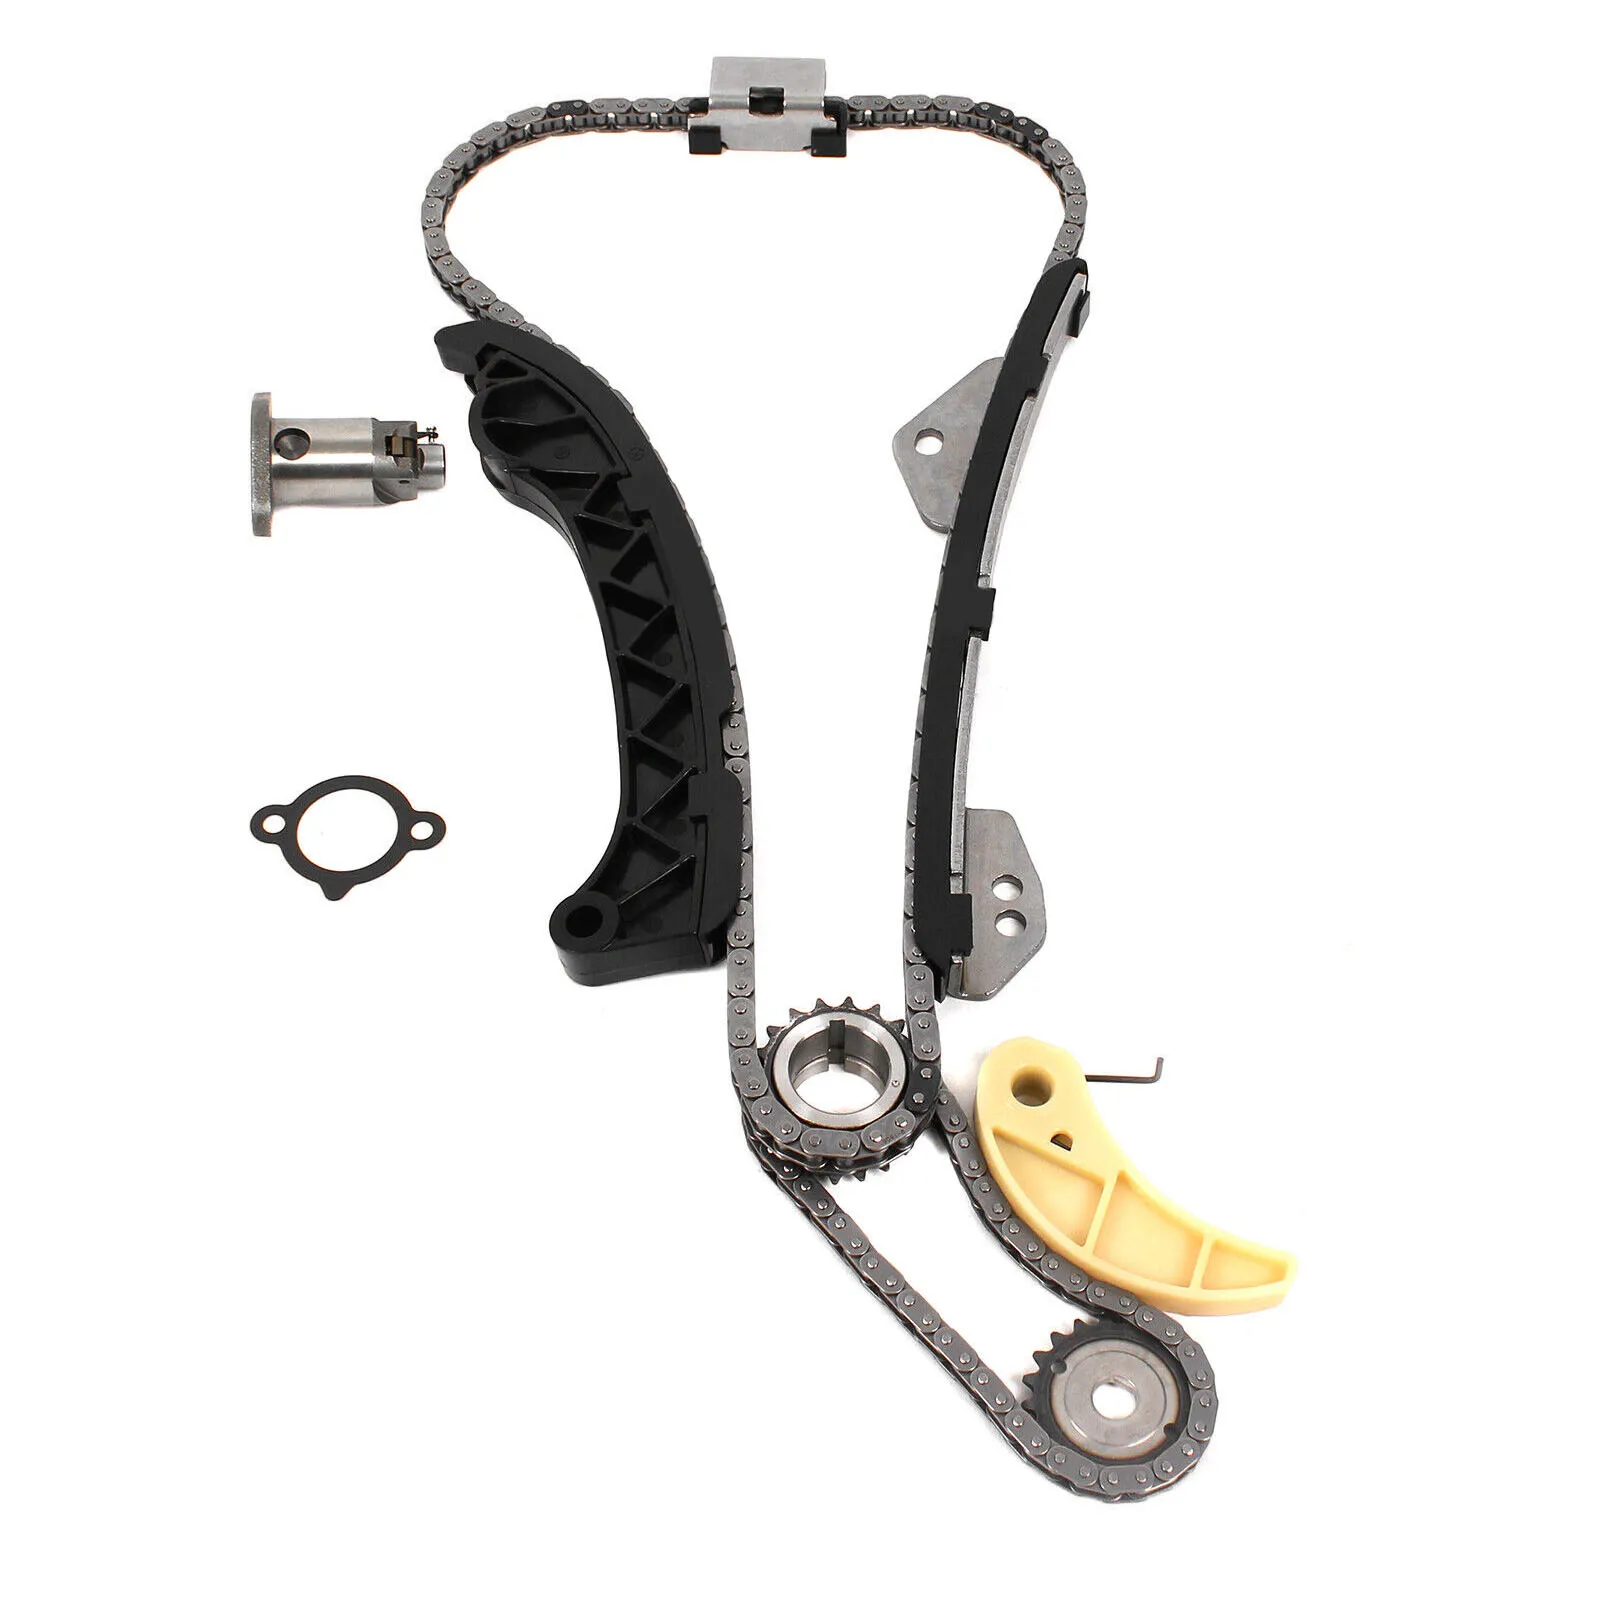 Timing Chain Kit for 08-14 SCION XD 1.8L 2ZRFE 2ZRFXE